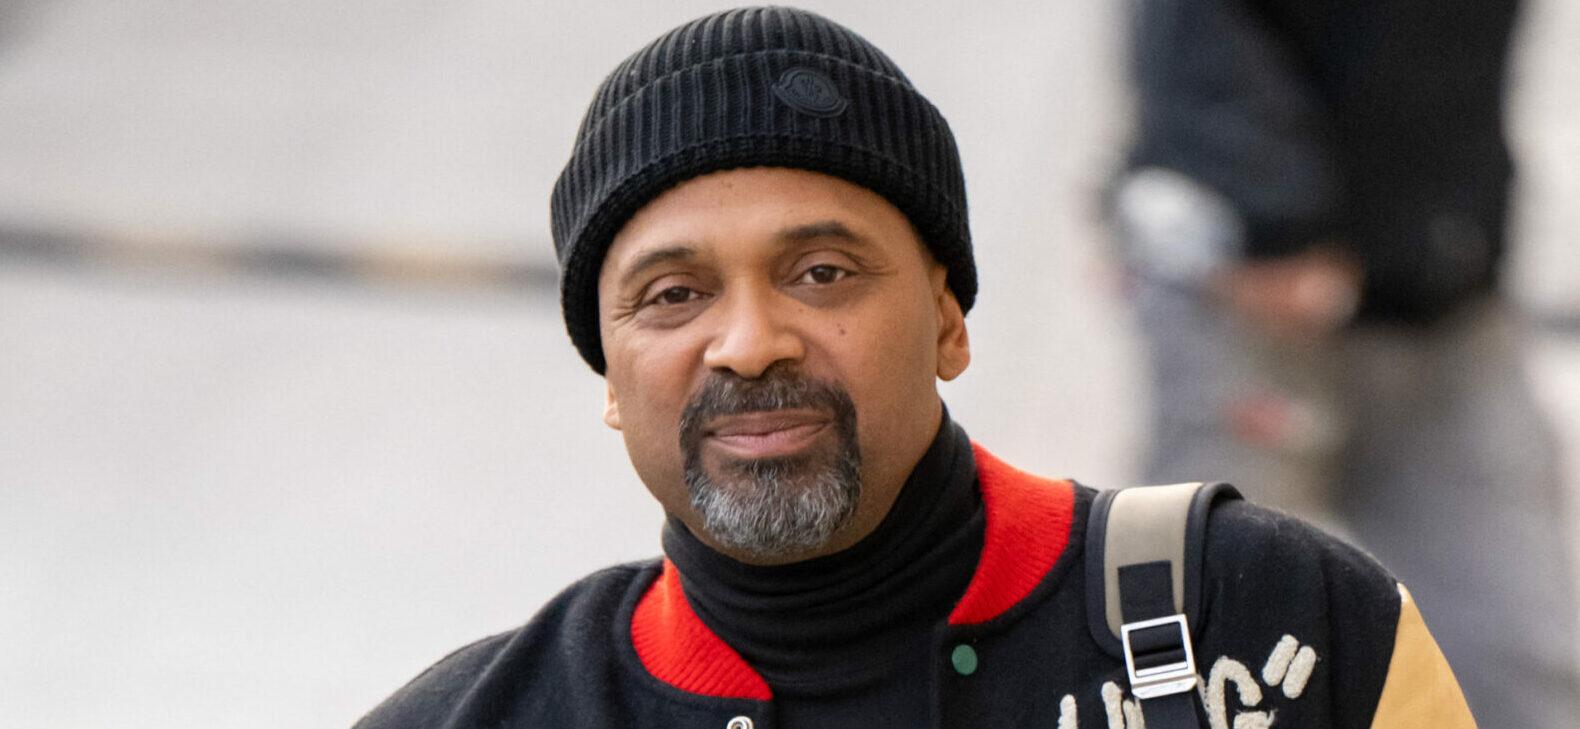 Mike Epps Not Sorry For Carrying Gun Found At Indianapolis Airport